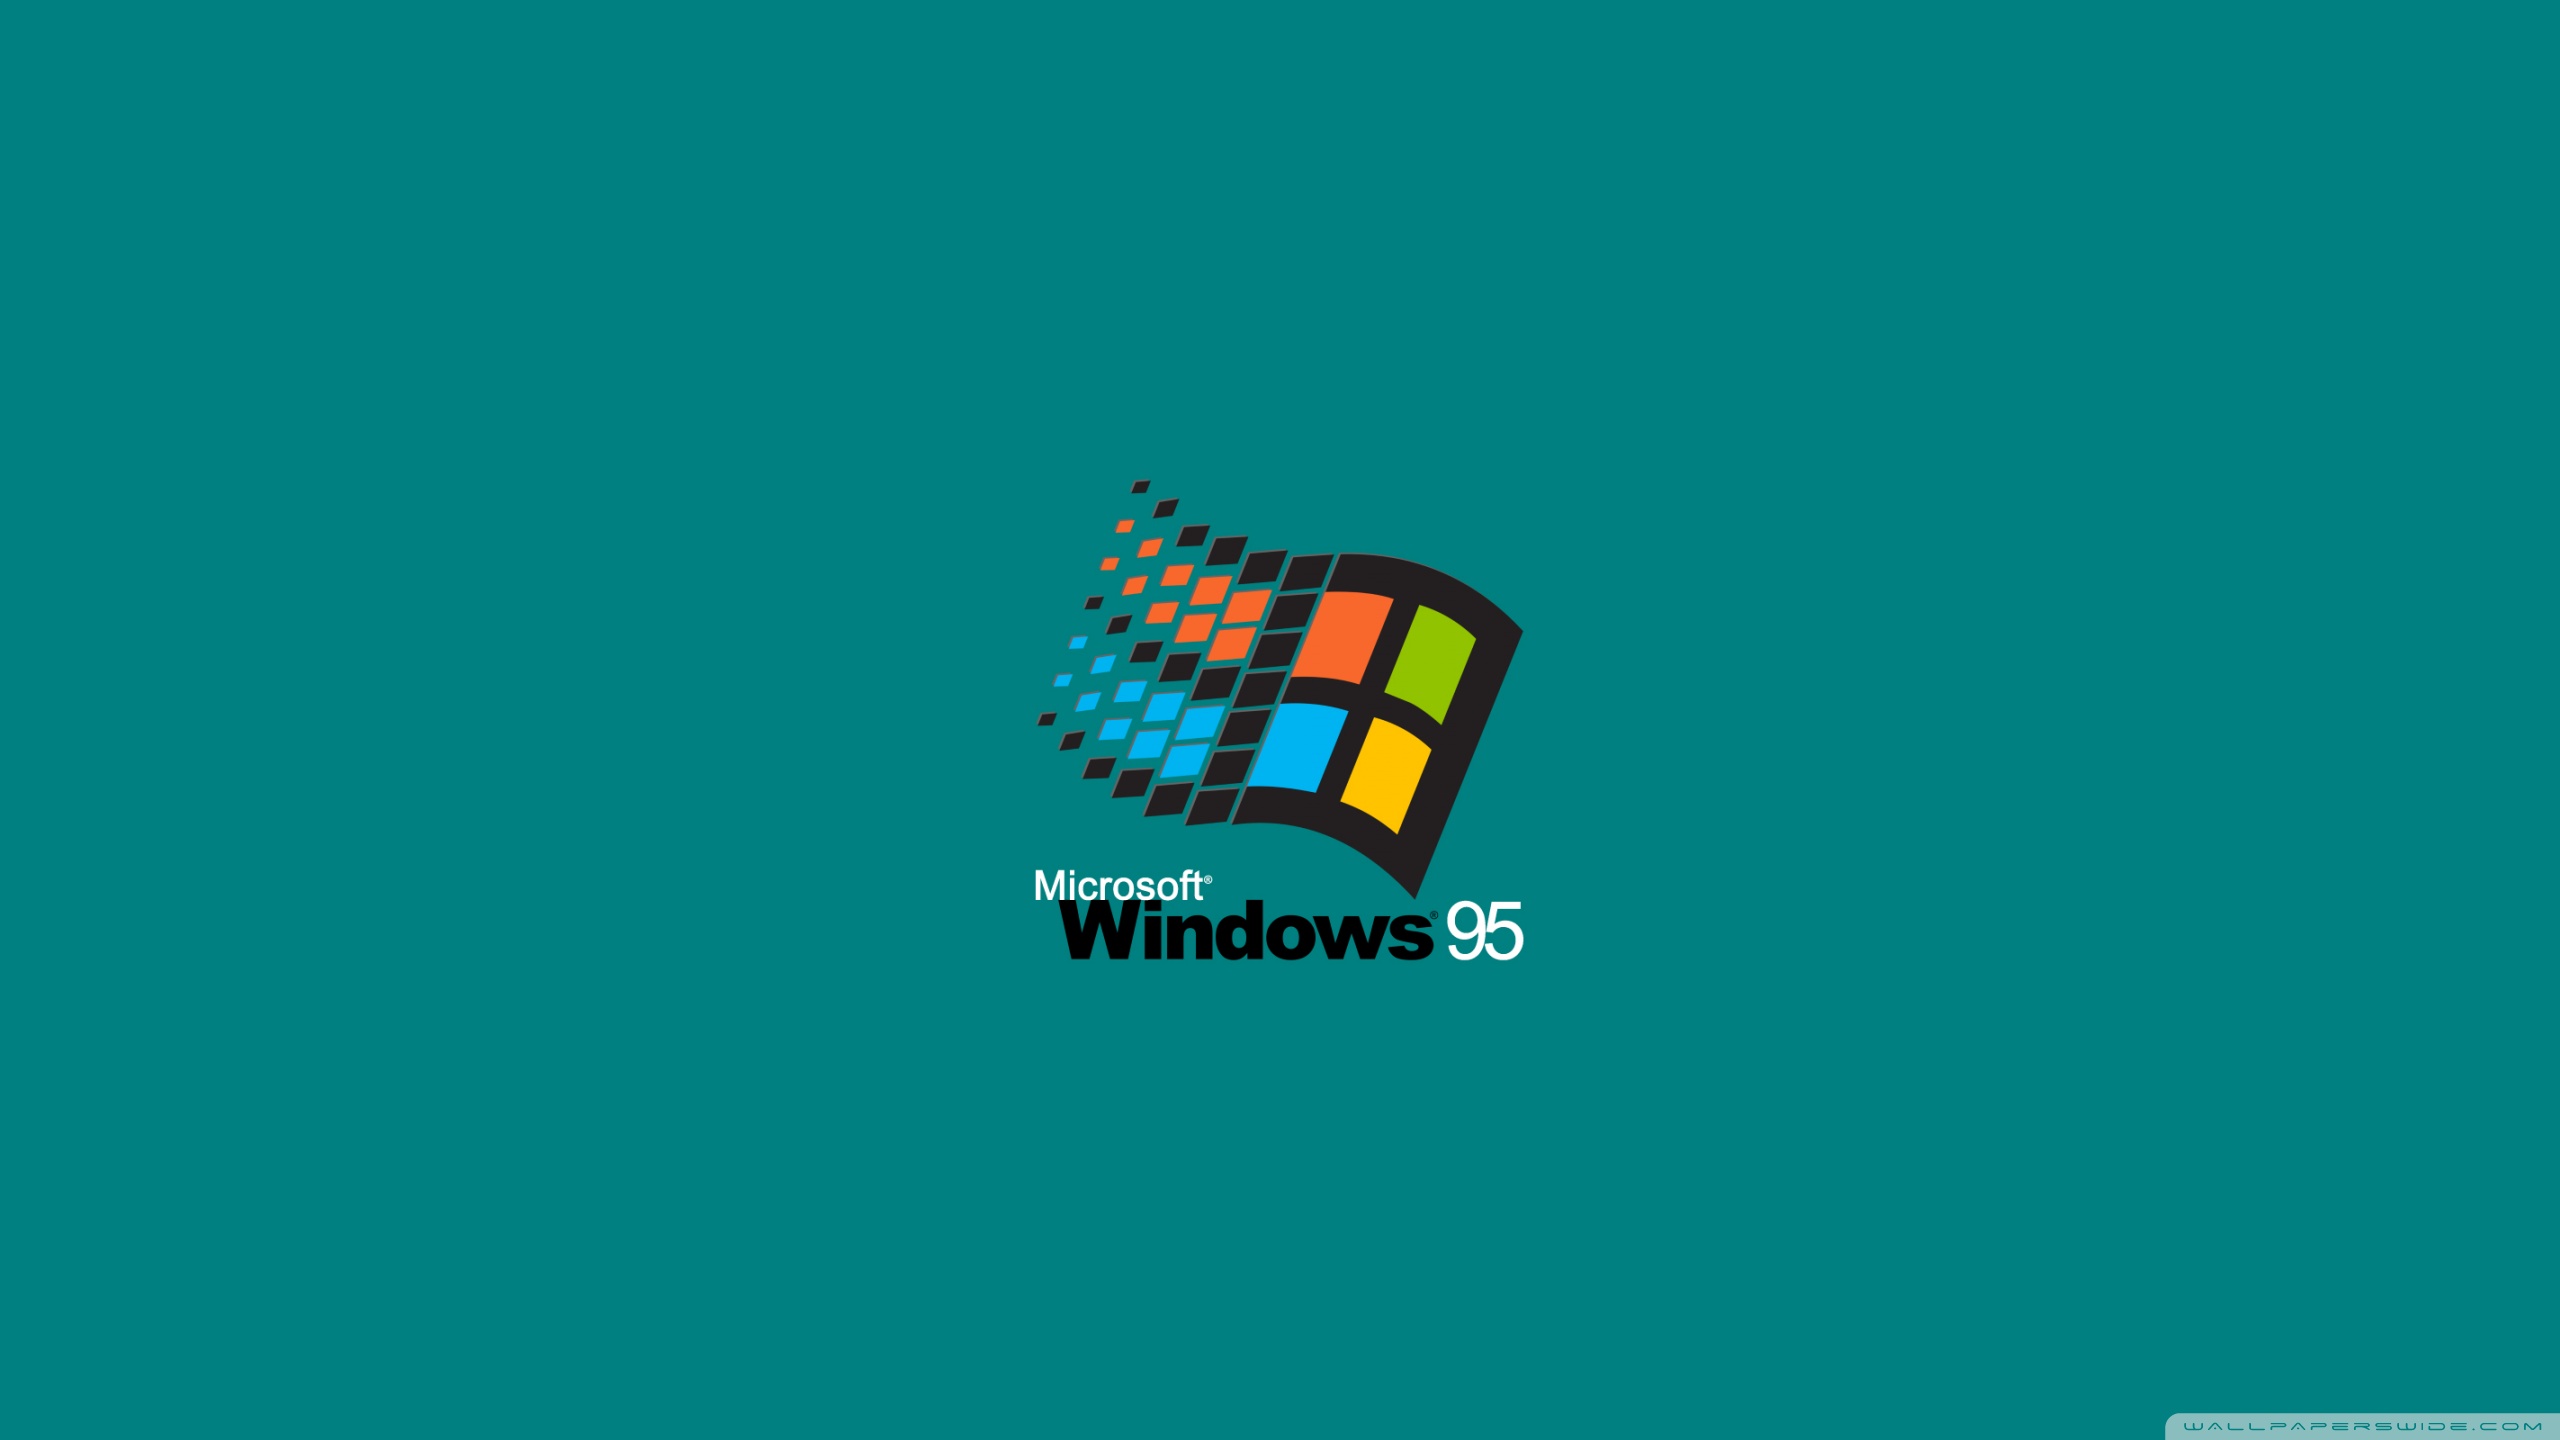 Windows 95 4k wallpaper Resolution 2560x1440 | Best Download this awesome wallpaper - Cool Wallpaper HD - CoolWallpaper-HD.com